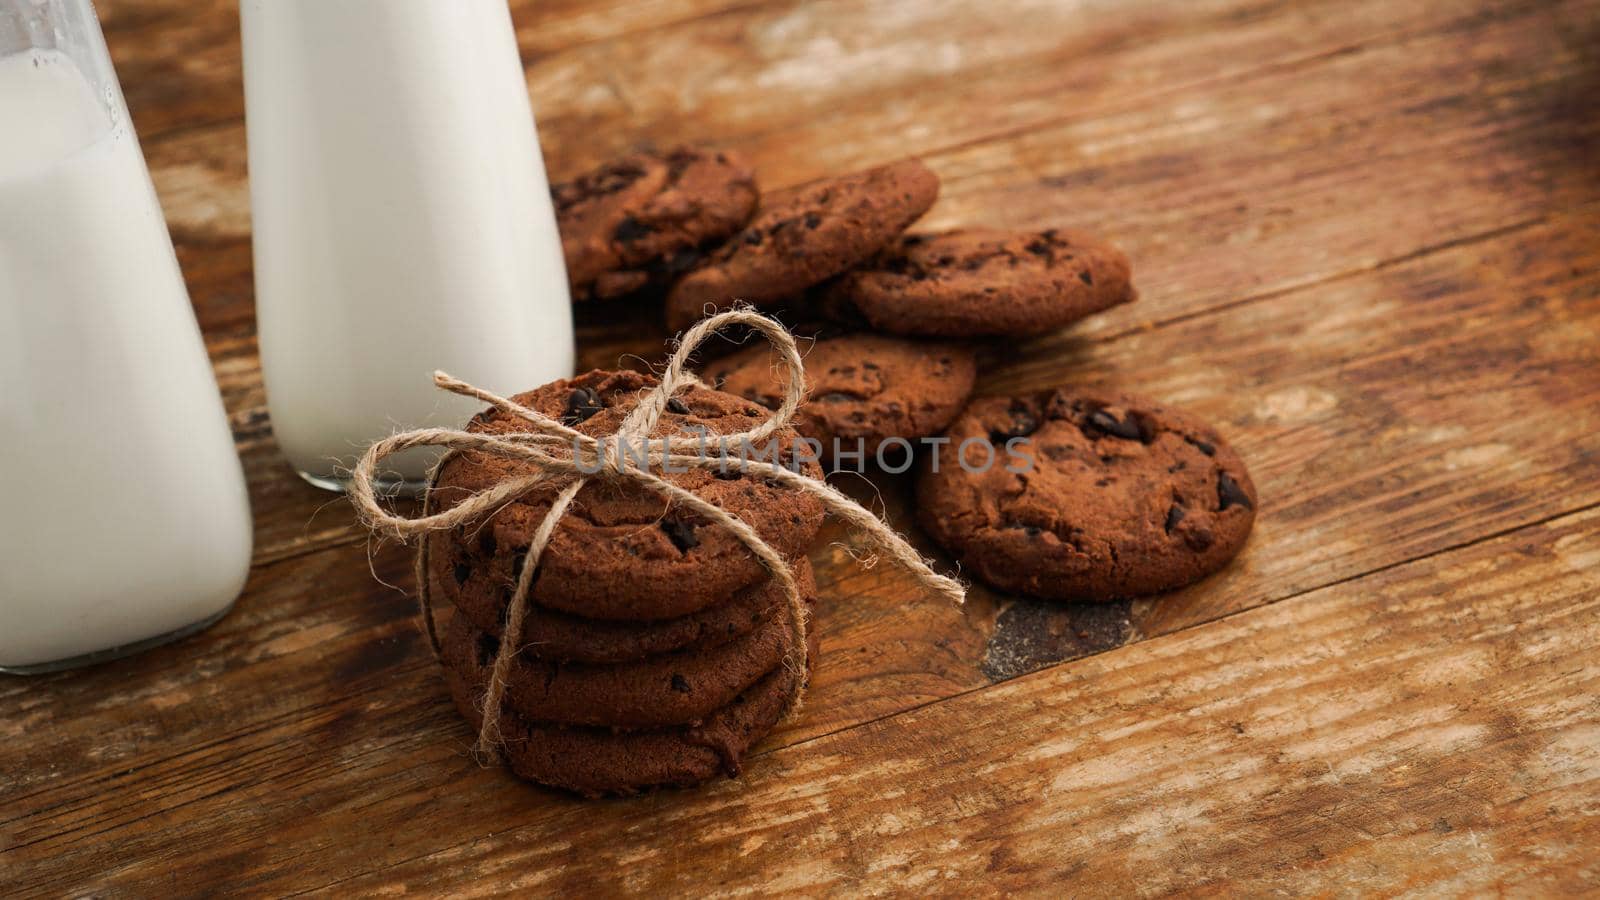 Chocolate cookie with milk on wooden table. Homemade cookies. The concept of natural and healthy nutrition. Bakery products